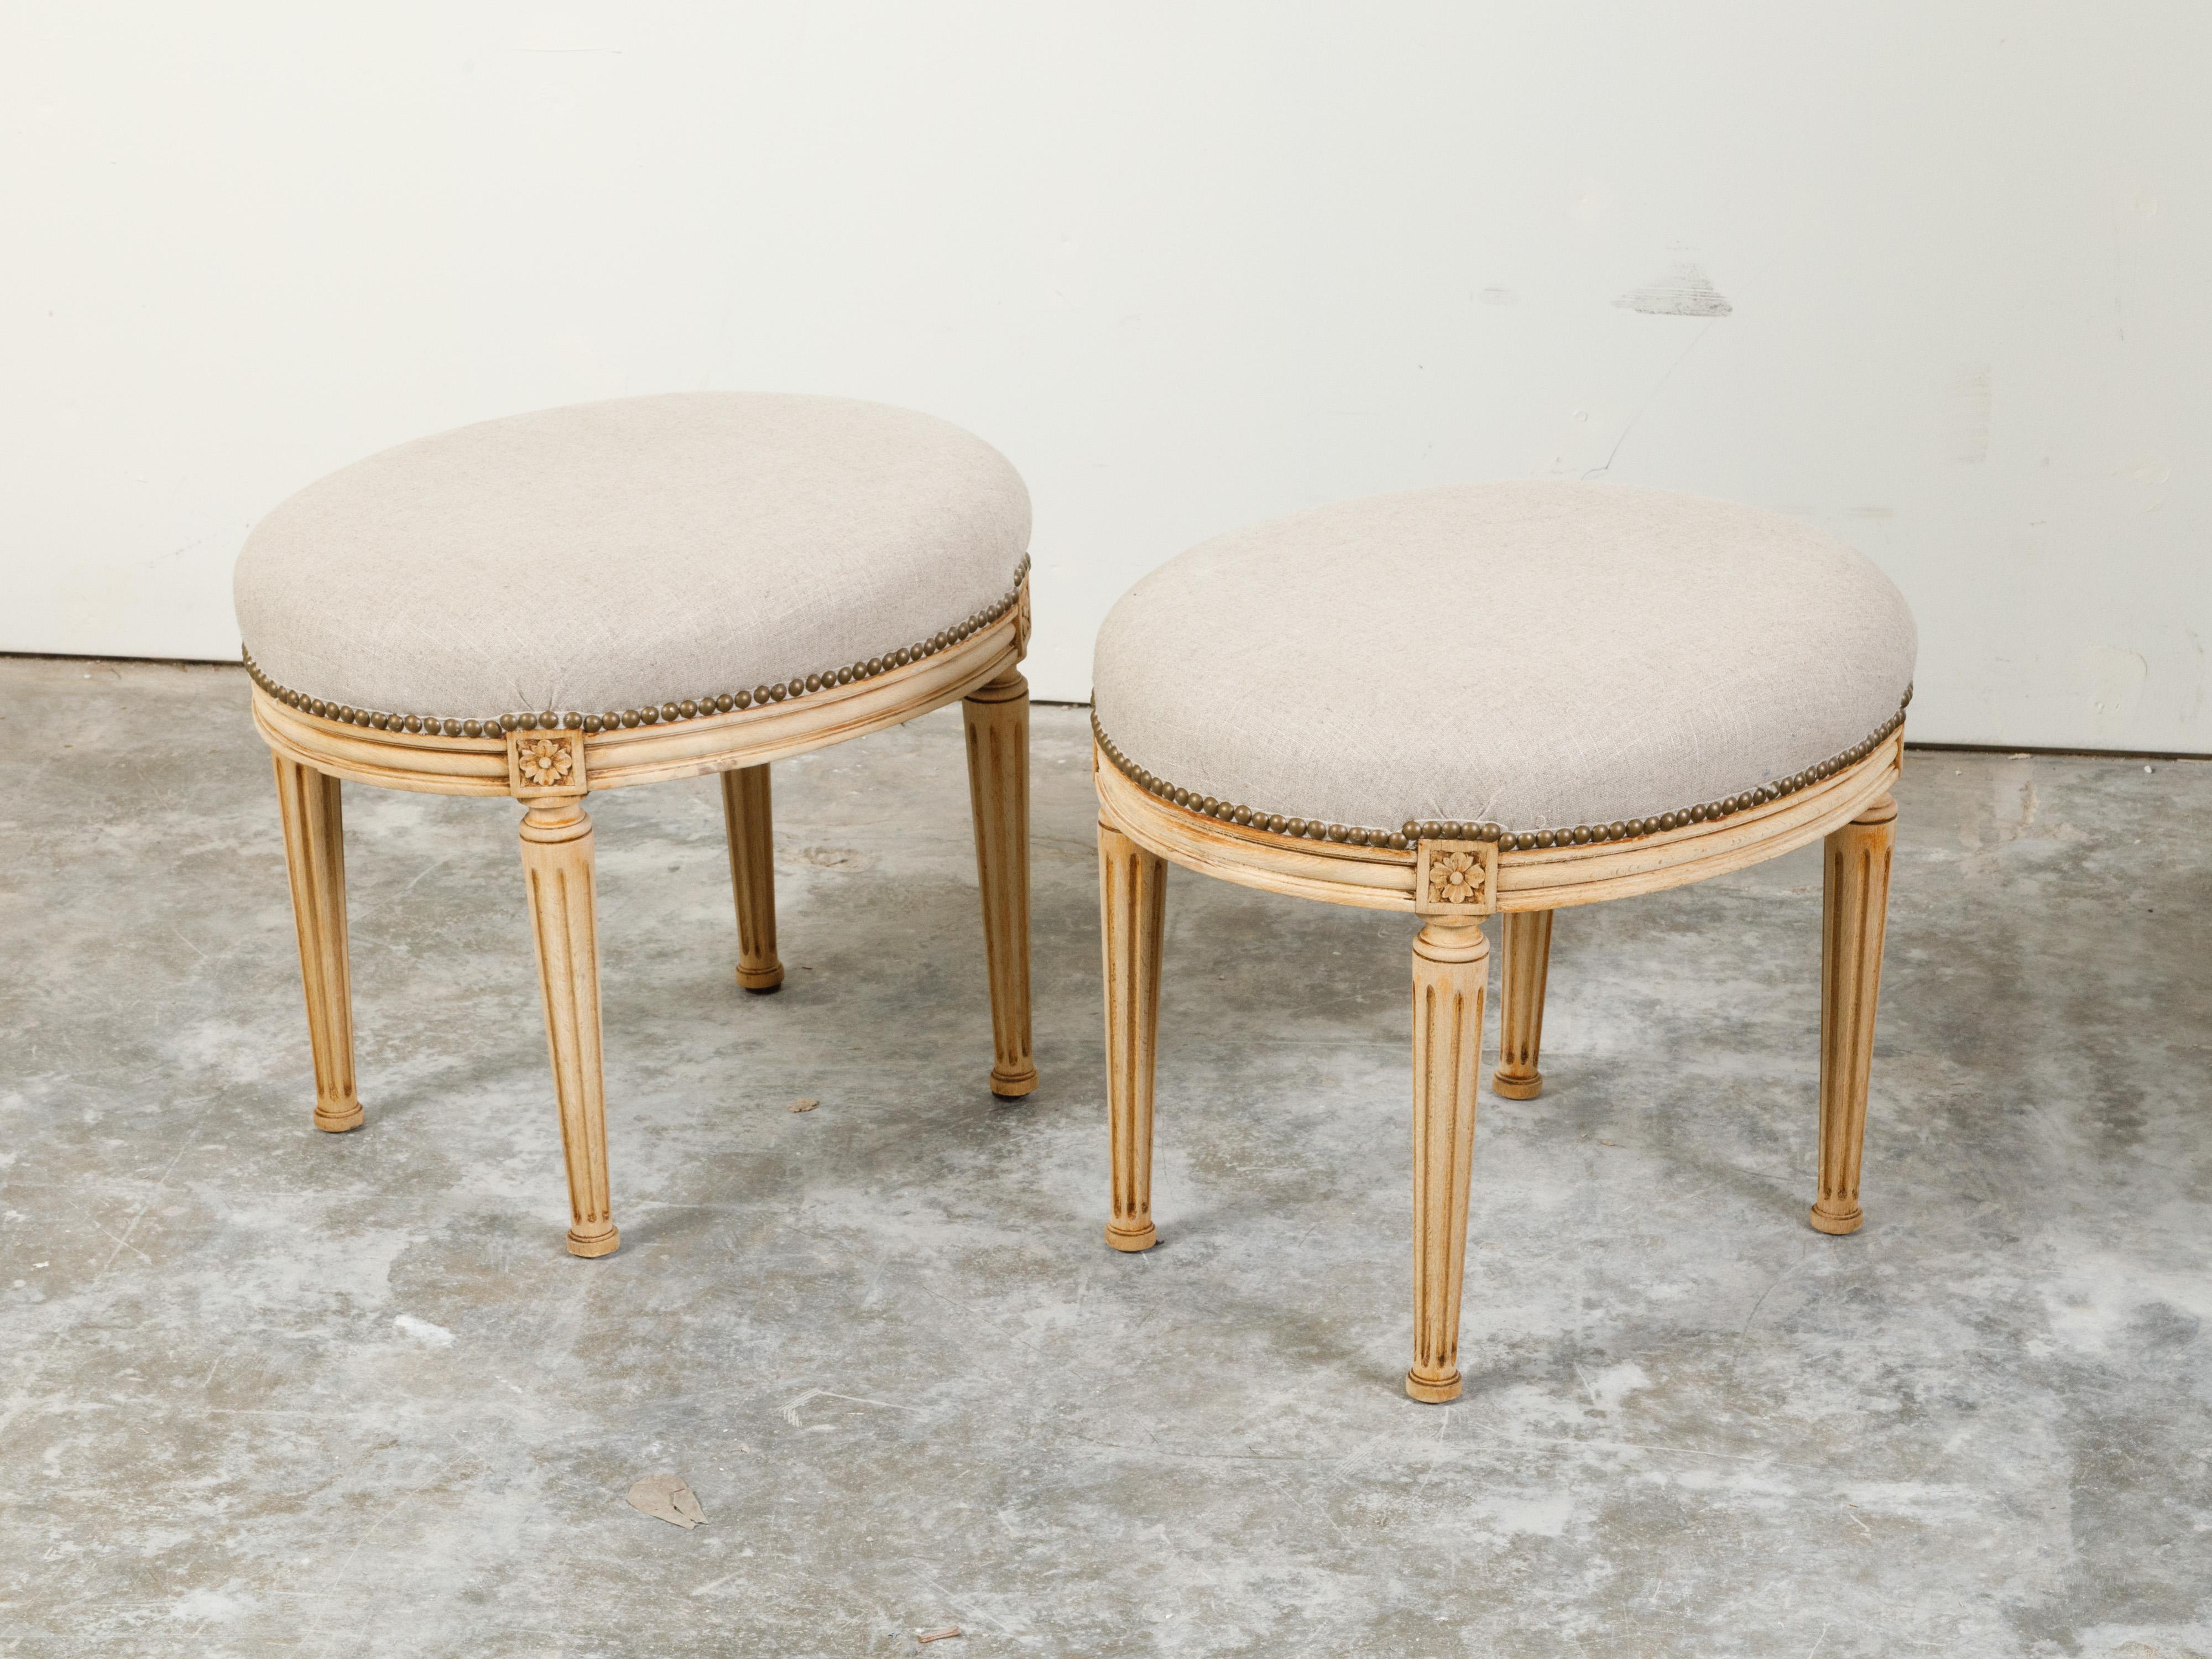 Turned Pair of French Neoclassical Style Bleached Wood Stools with New Upholstery For Sale